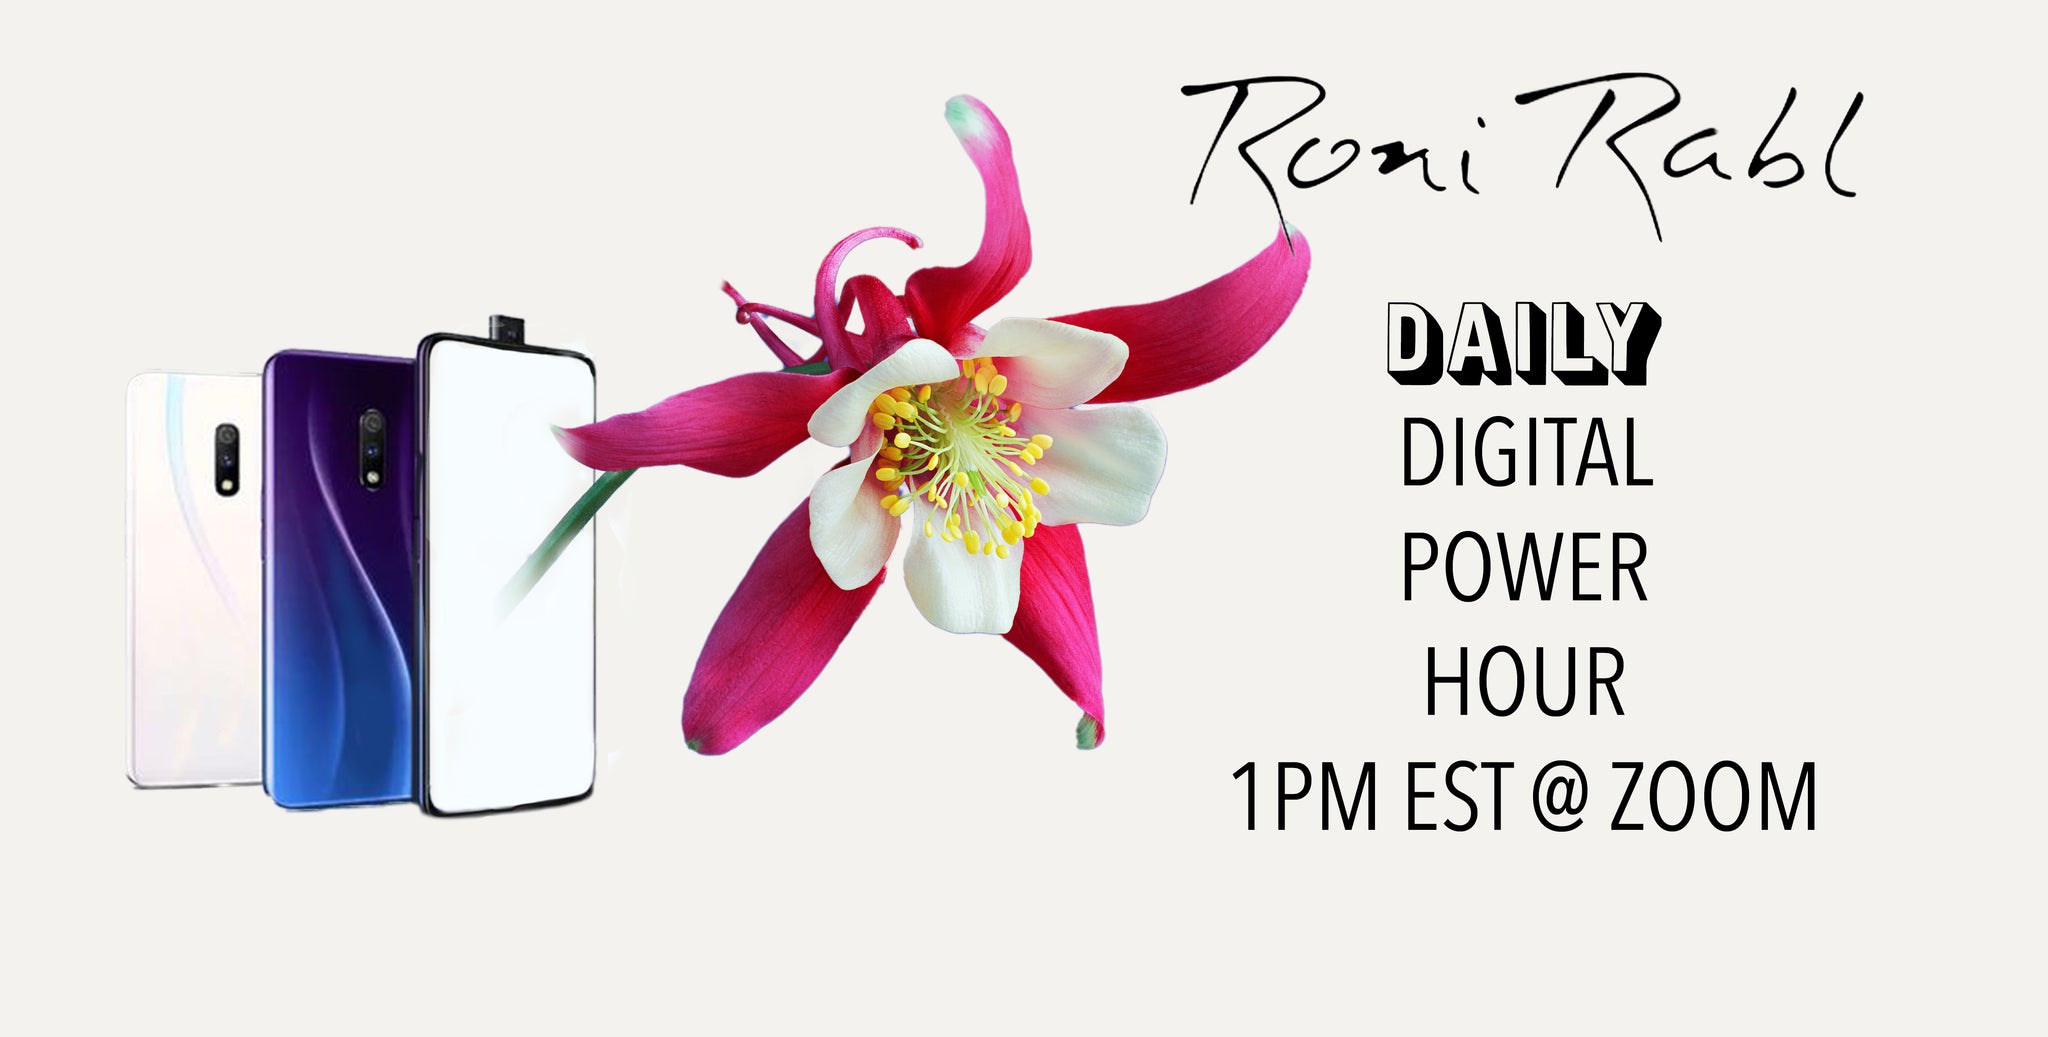 Meet us at the Roni Rabl Digital Power Hour - Now DAILY!